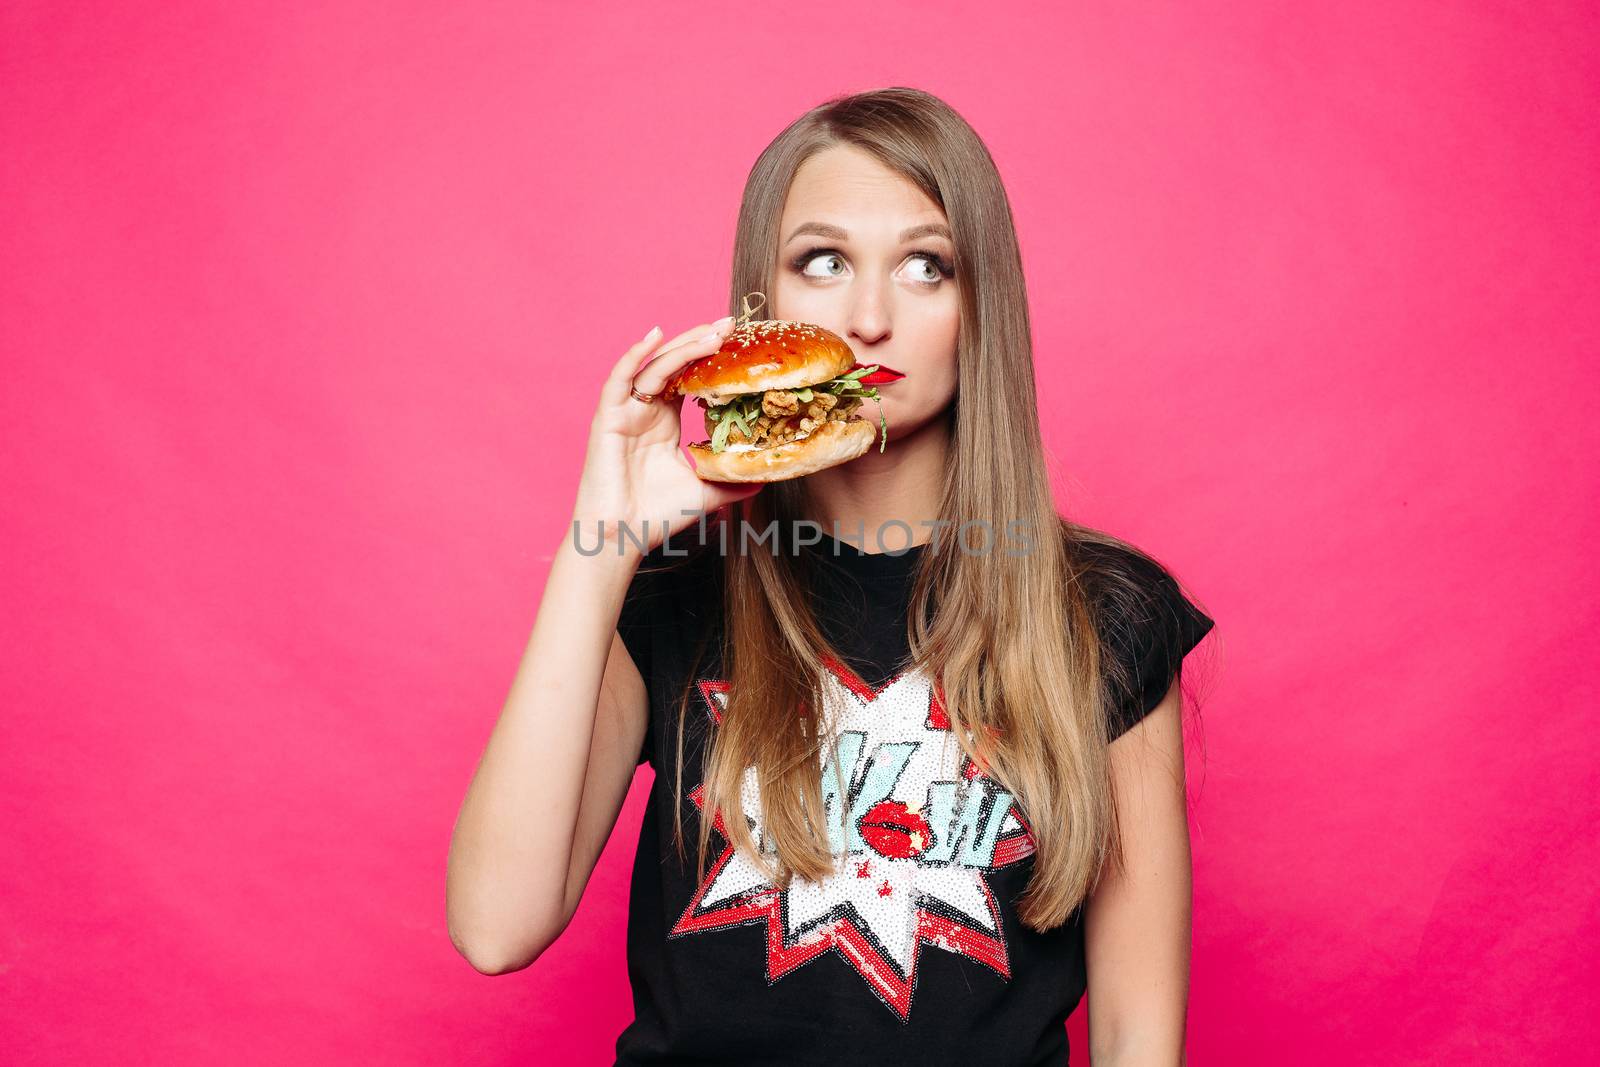 Sadly girl thinking eating tasty humburger or no. by StudioLucky